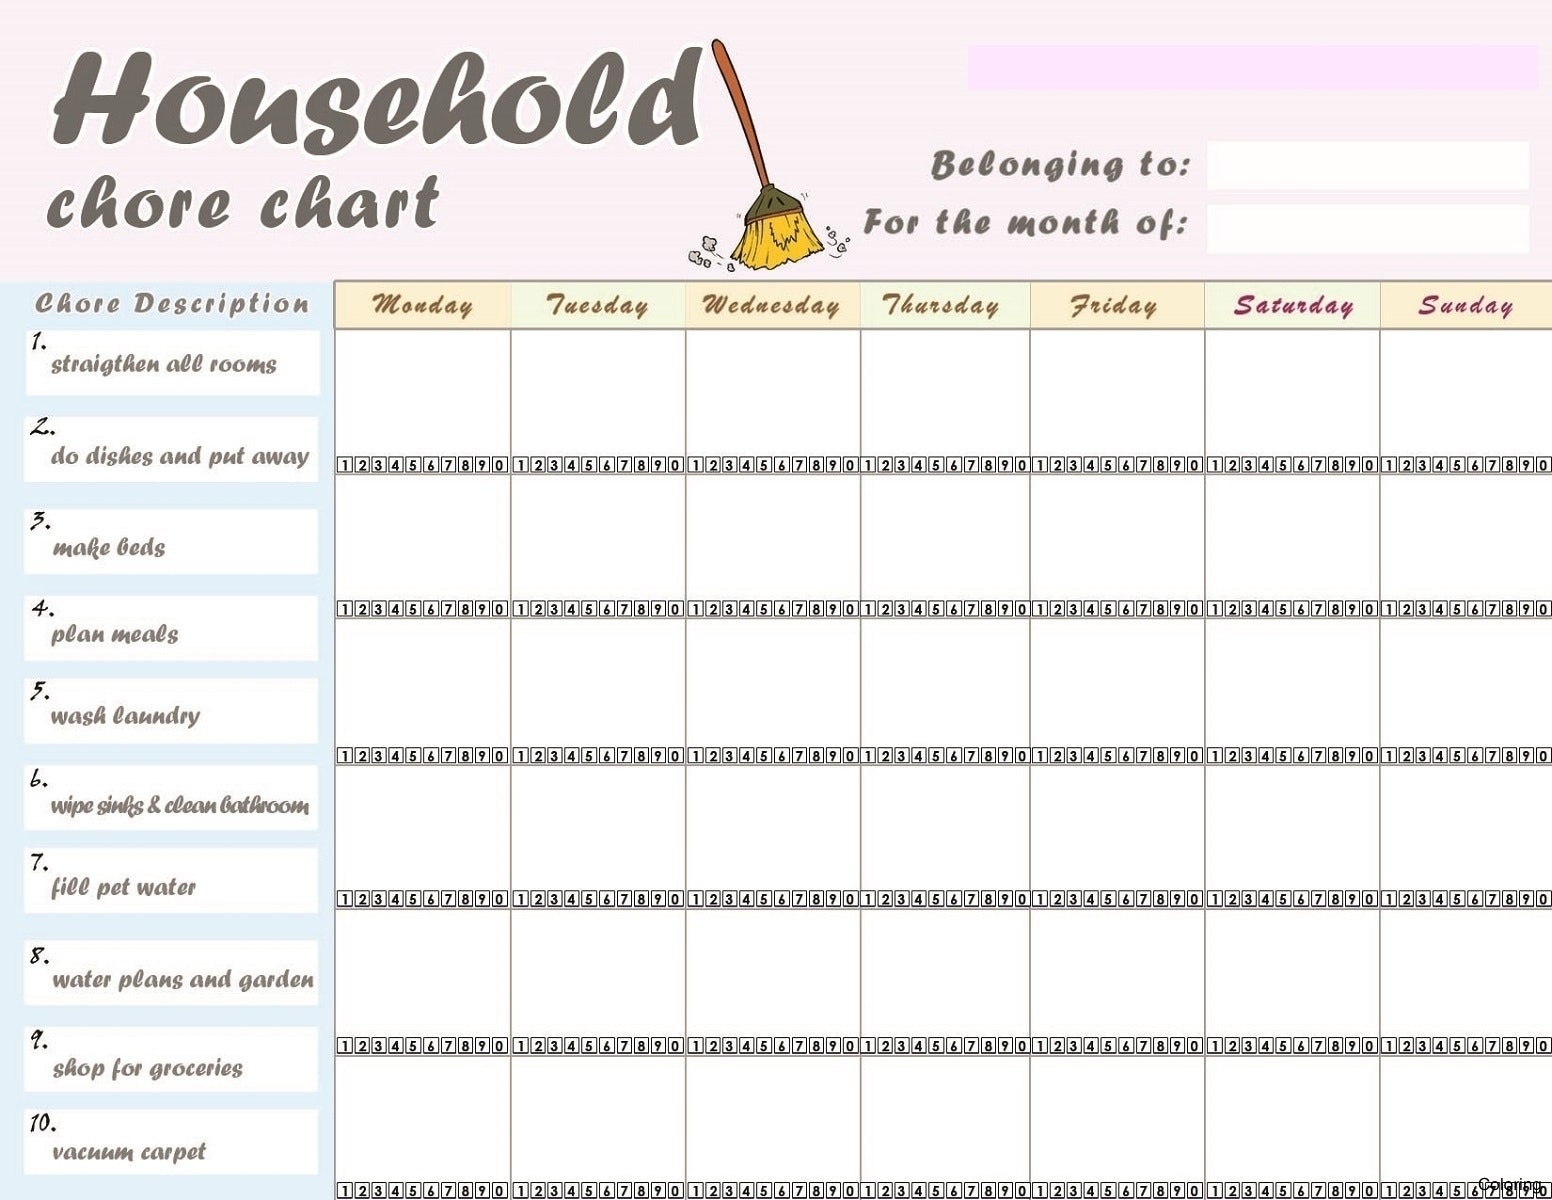 Free Printable Chore Chart - - Chore Chart For Adults Printable Free